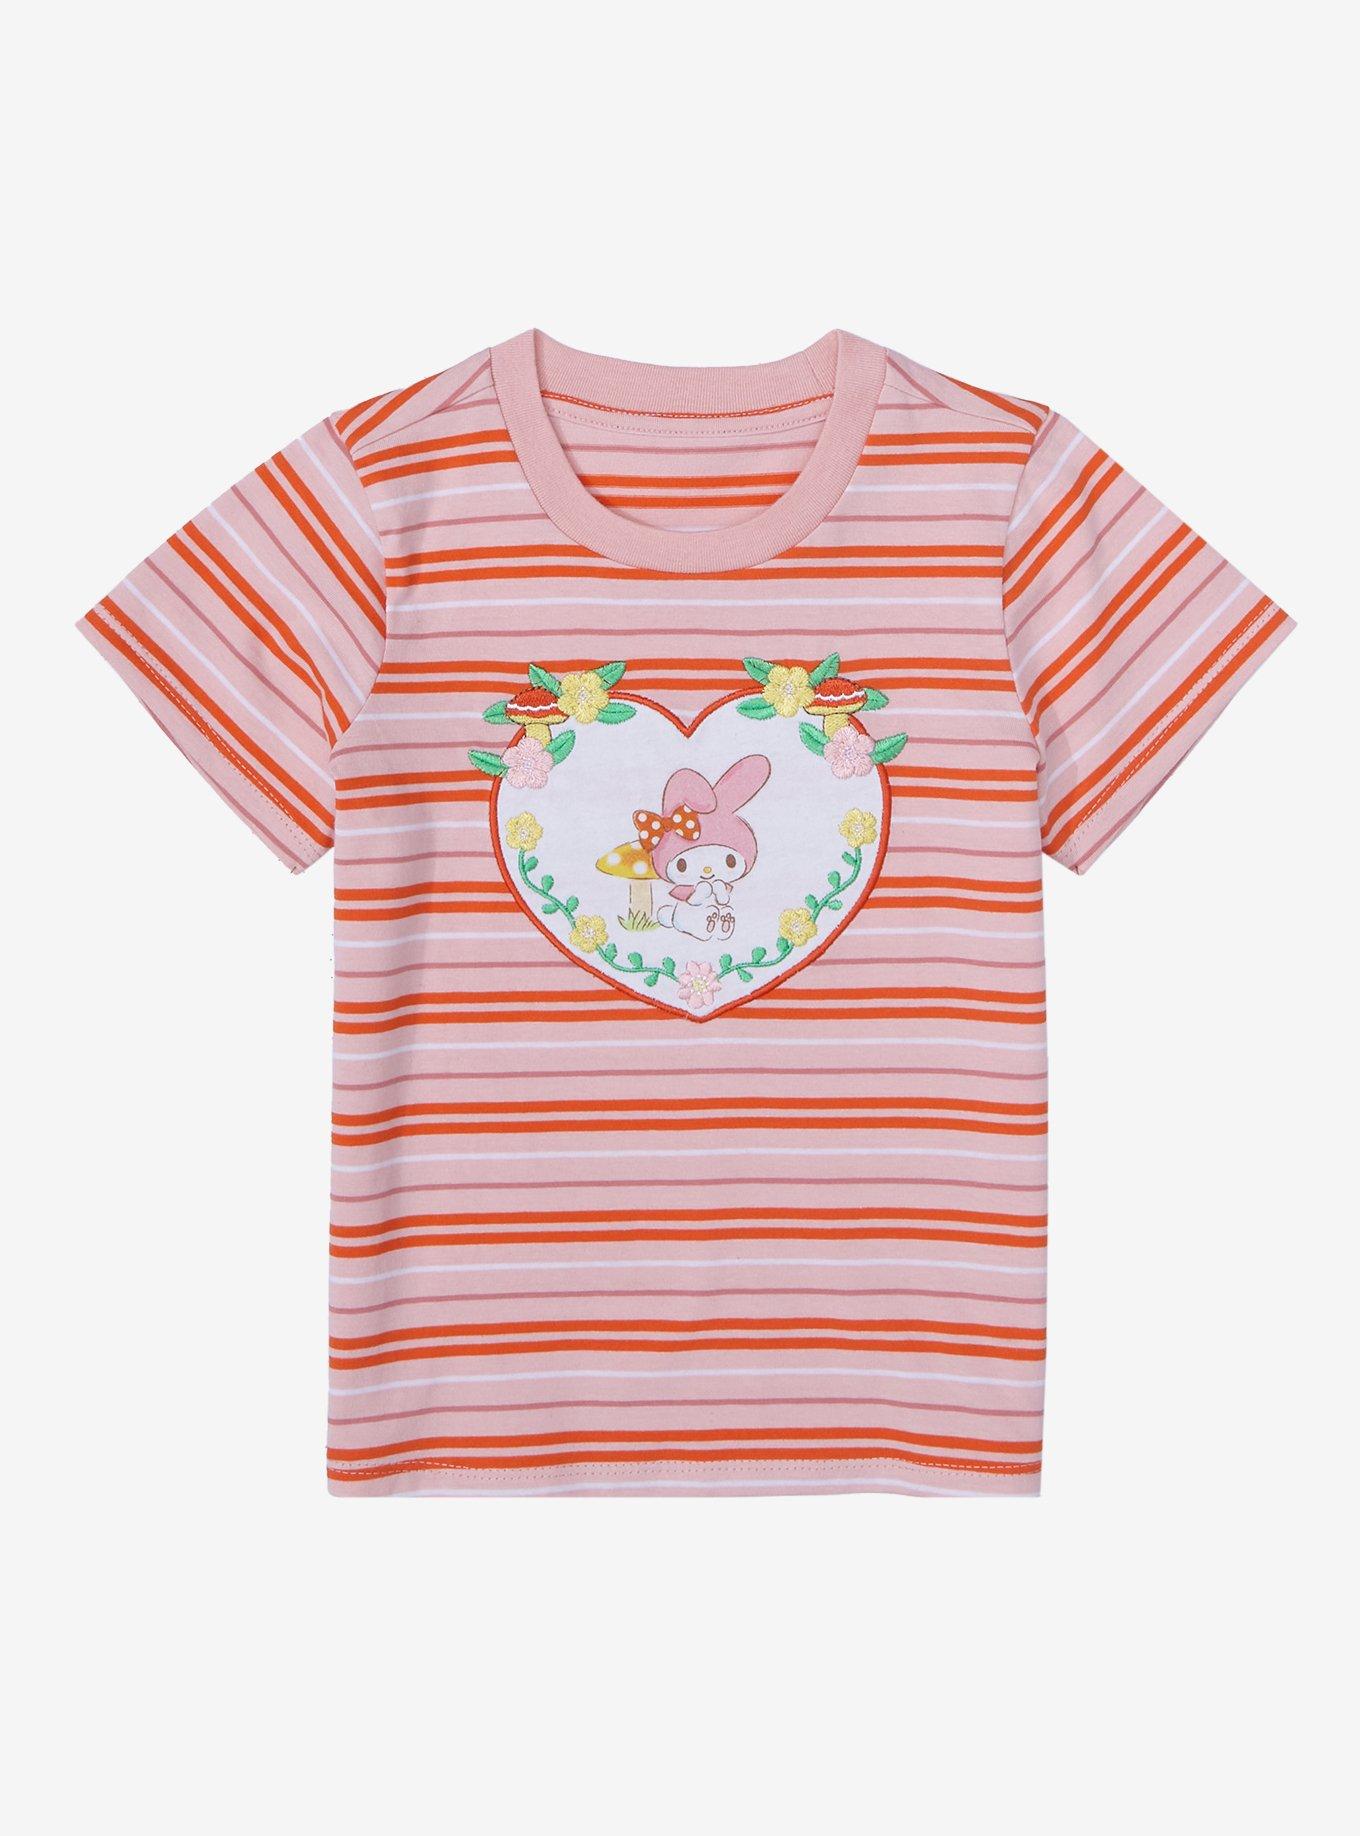 Sanrio My Melody Mushroom Striped Toddler T-Shirt - BoxLunch Exclusive, LIGHT PINK, hi-res